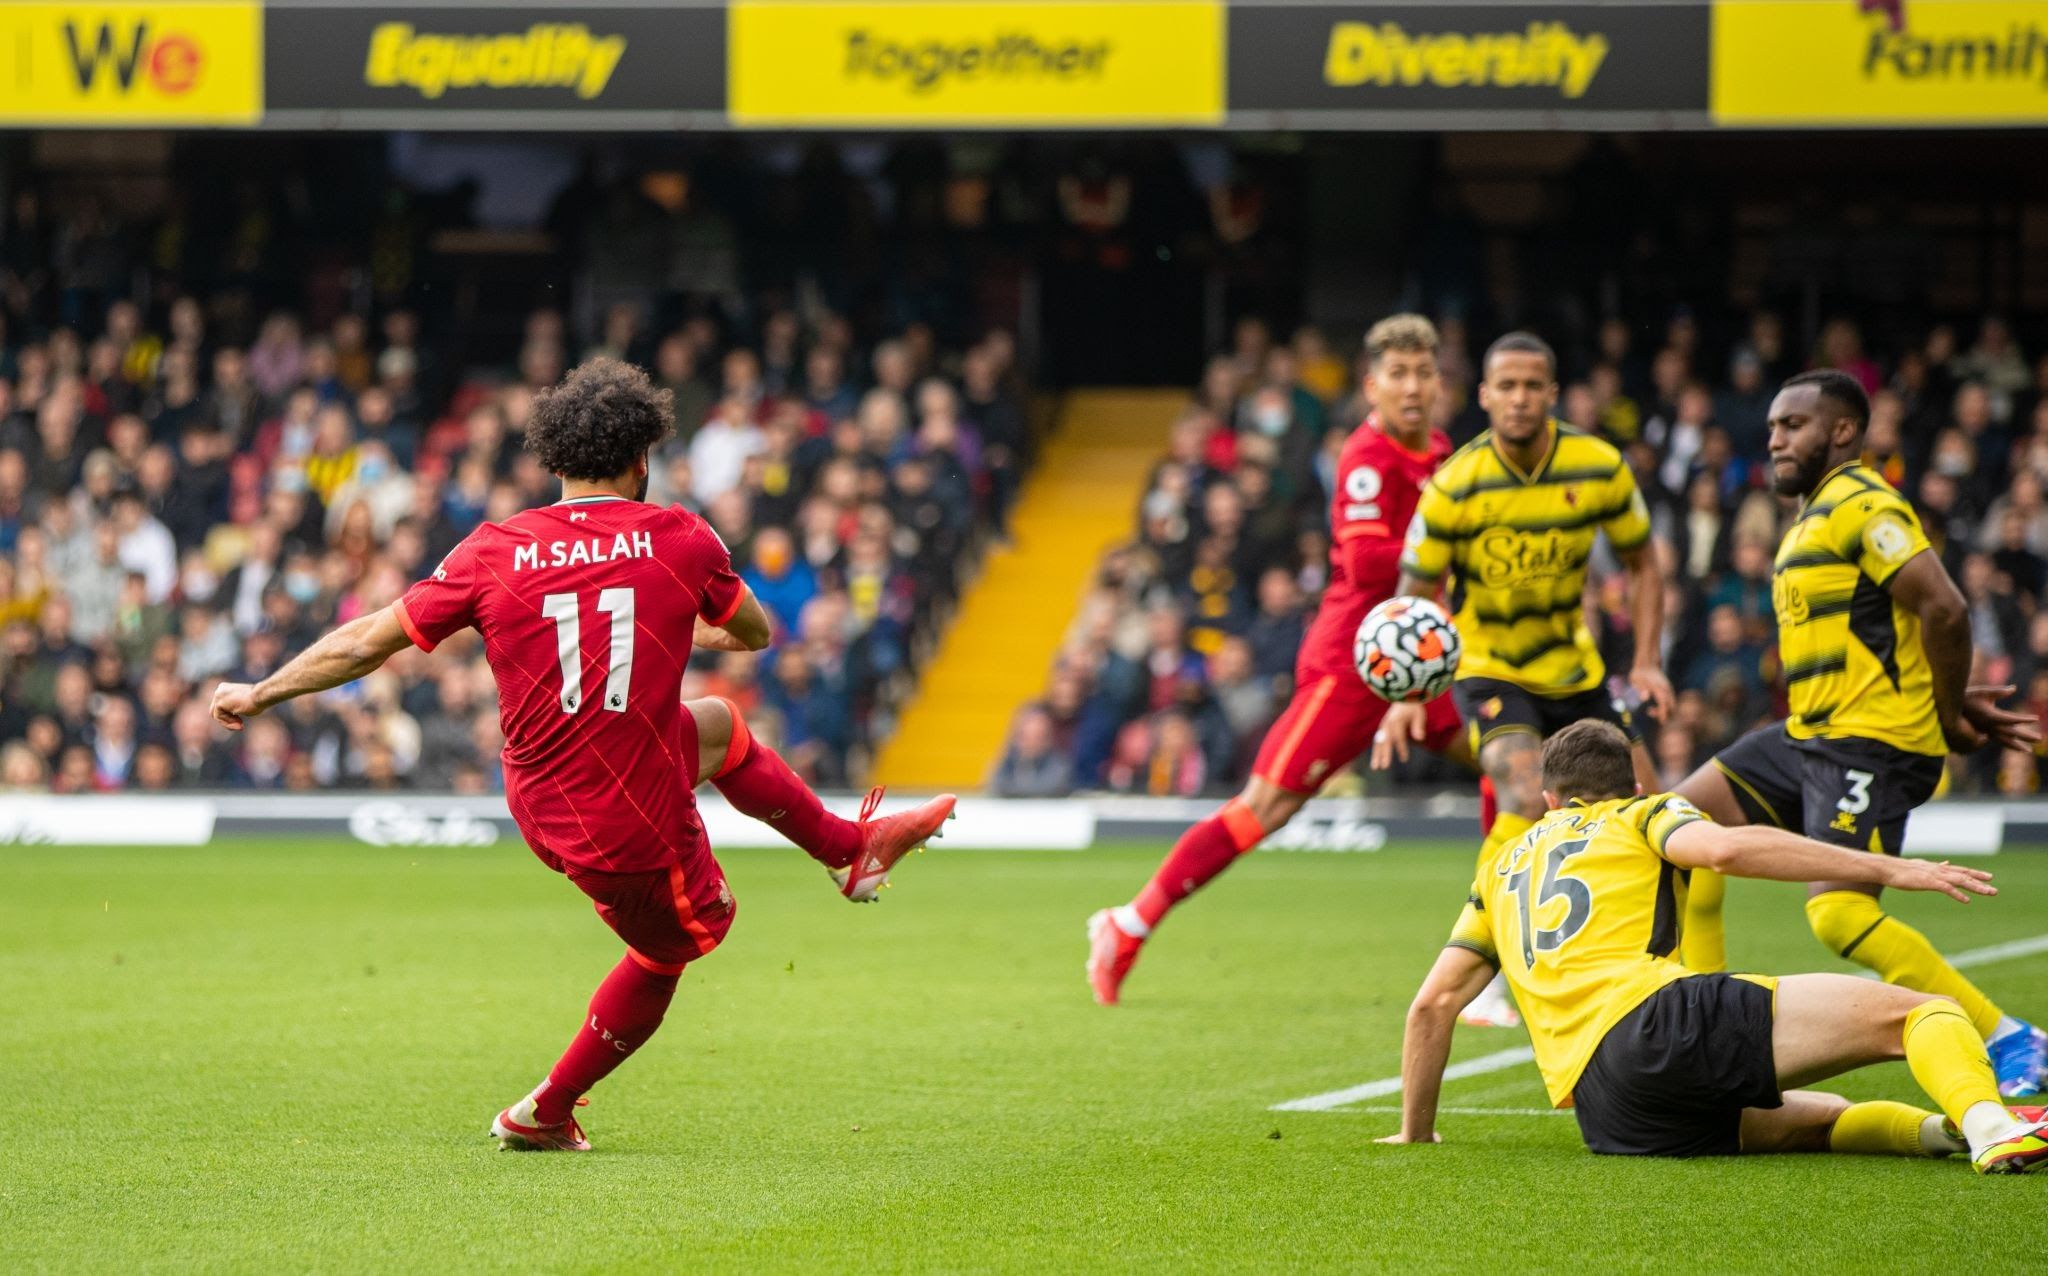 EPL: Hattrick for Firmino as Liverpool wins big against Watford